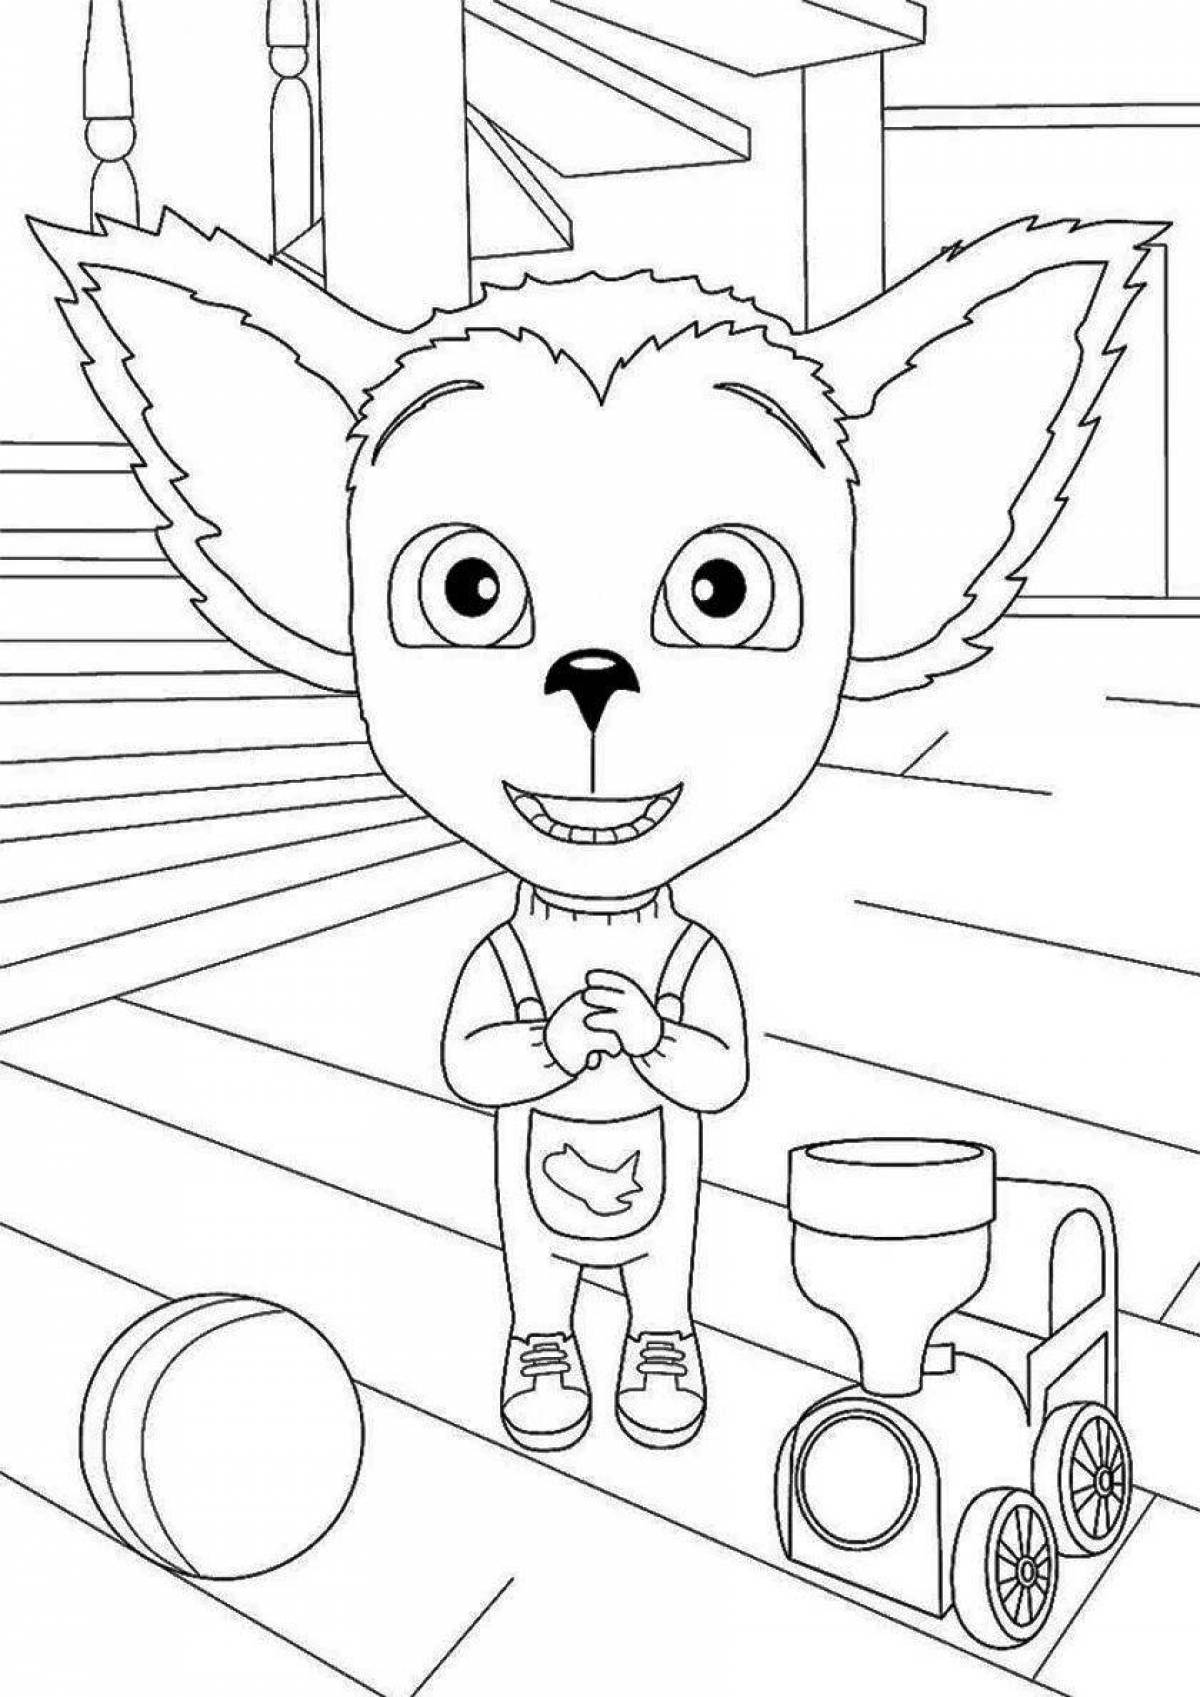 Coloring book of the adorable baby Barboskin